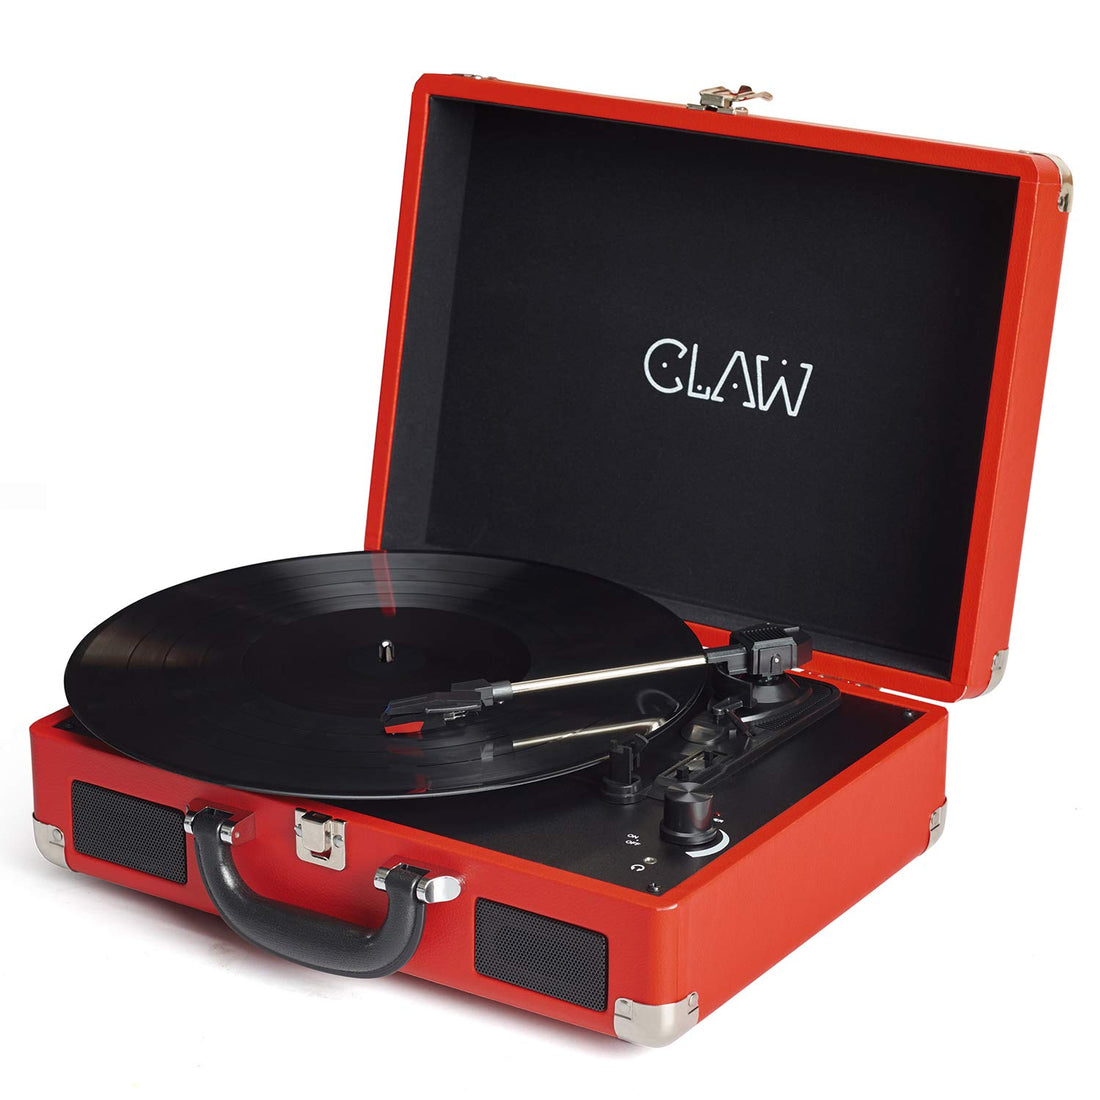 CLAW Stag Portable - Turntable with Built-in Stereo Speakers (Red) (Use Code Origin5 to Get 5% DIscount)